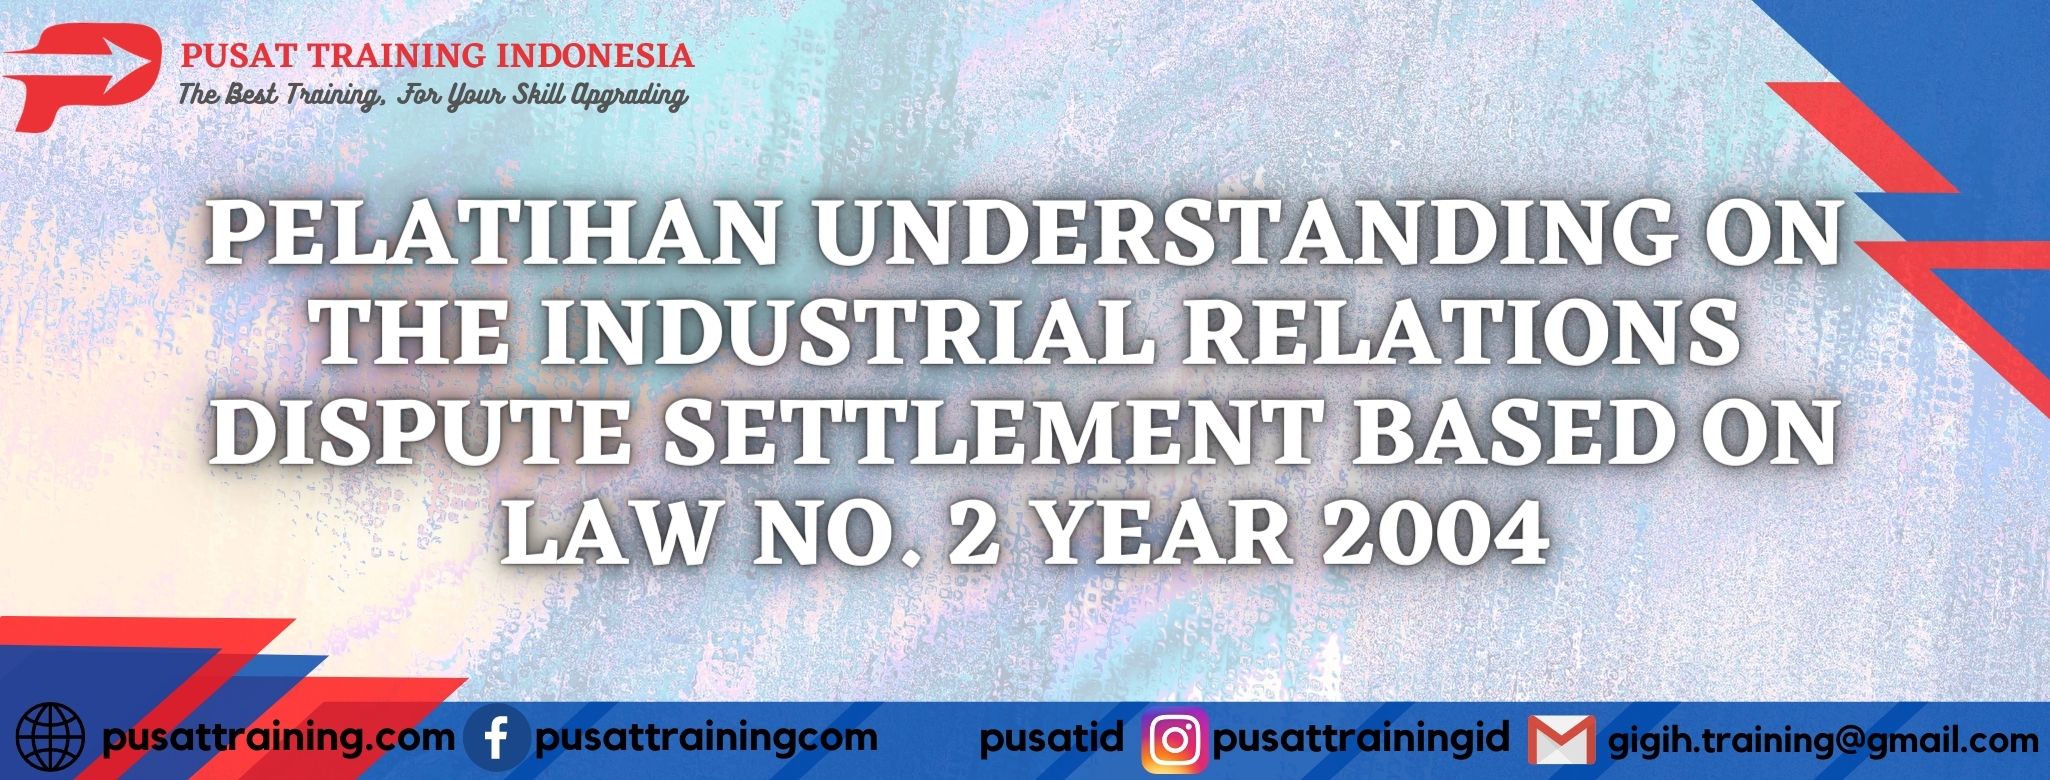 PELATIHAN-UNDERSTANDING-ON-THE-INDUSTRIAL-RELATIONS-DISPUTE-SETTLEMENT-BASED-ON-LAW-NO.-2-YEAR-2004